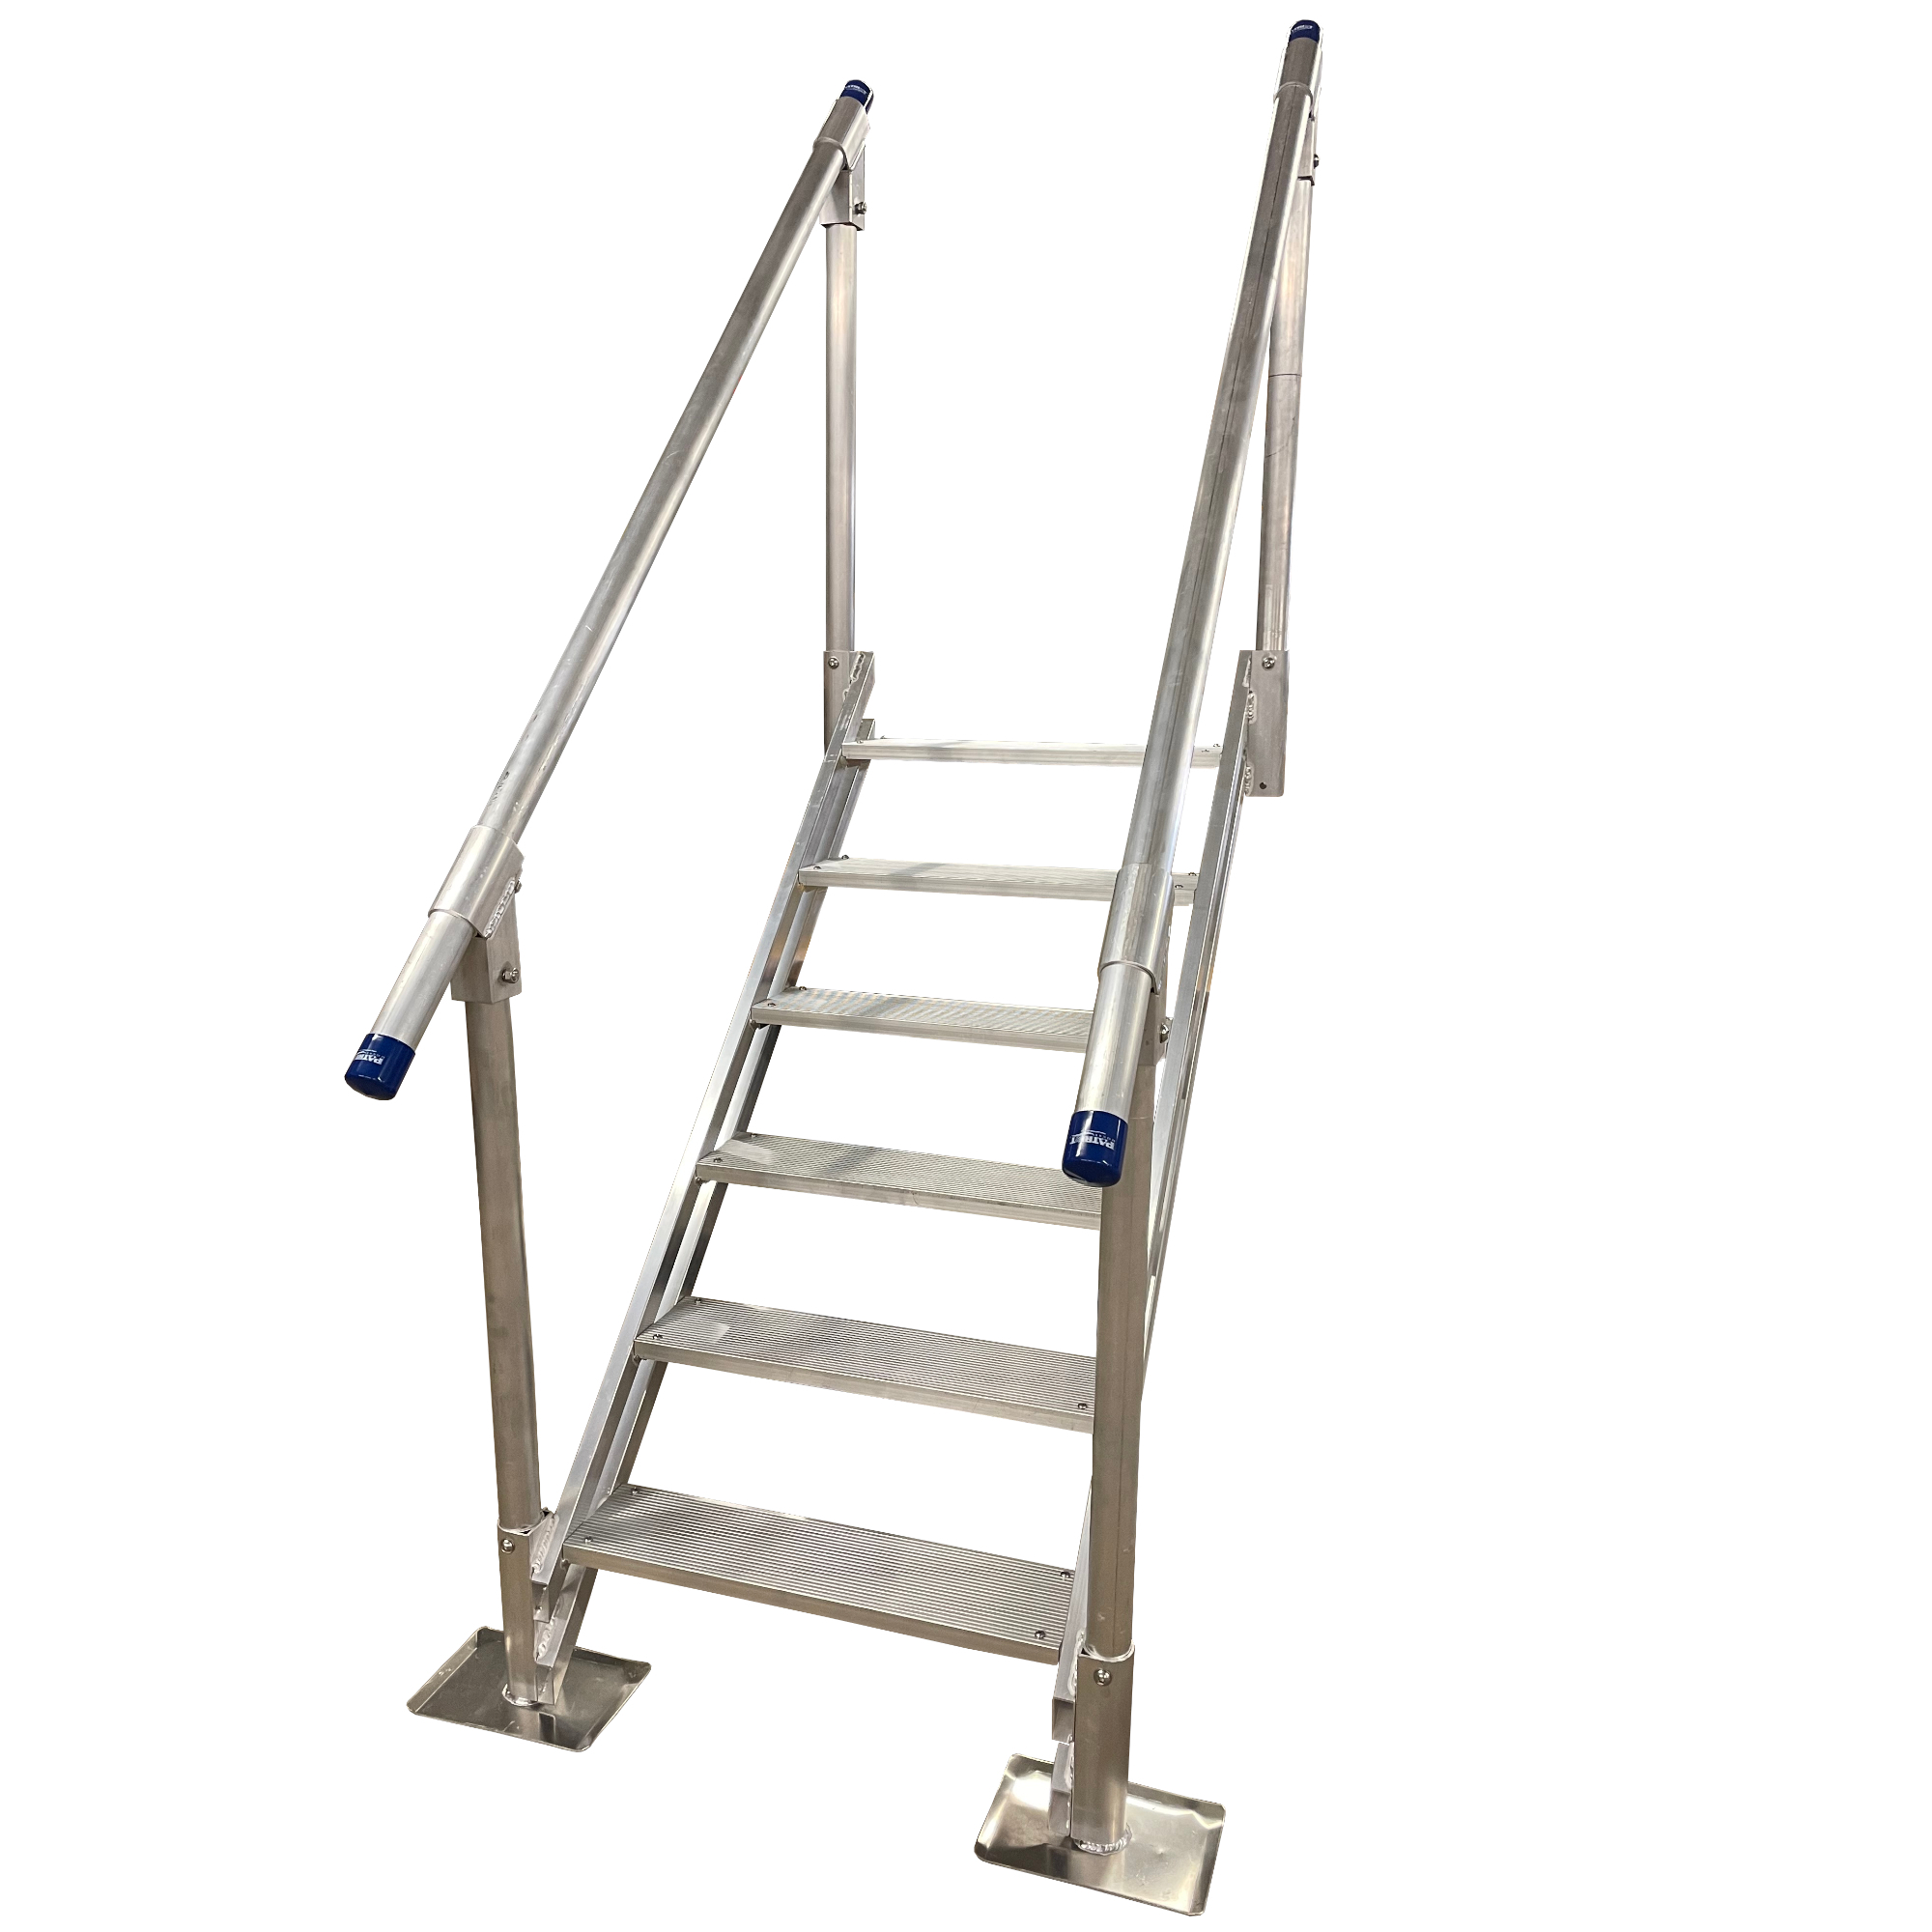 Patriot Docks, Marine Stairs, 6 Step (2 Handrails), Product Type Ladder, Length 48 in, Width 24 in, Model 10926